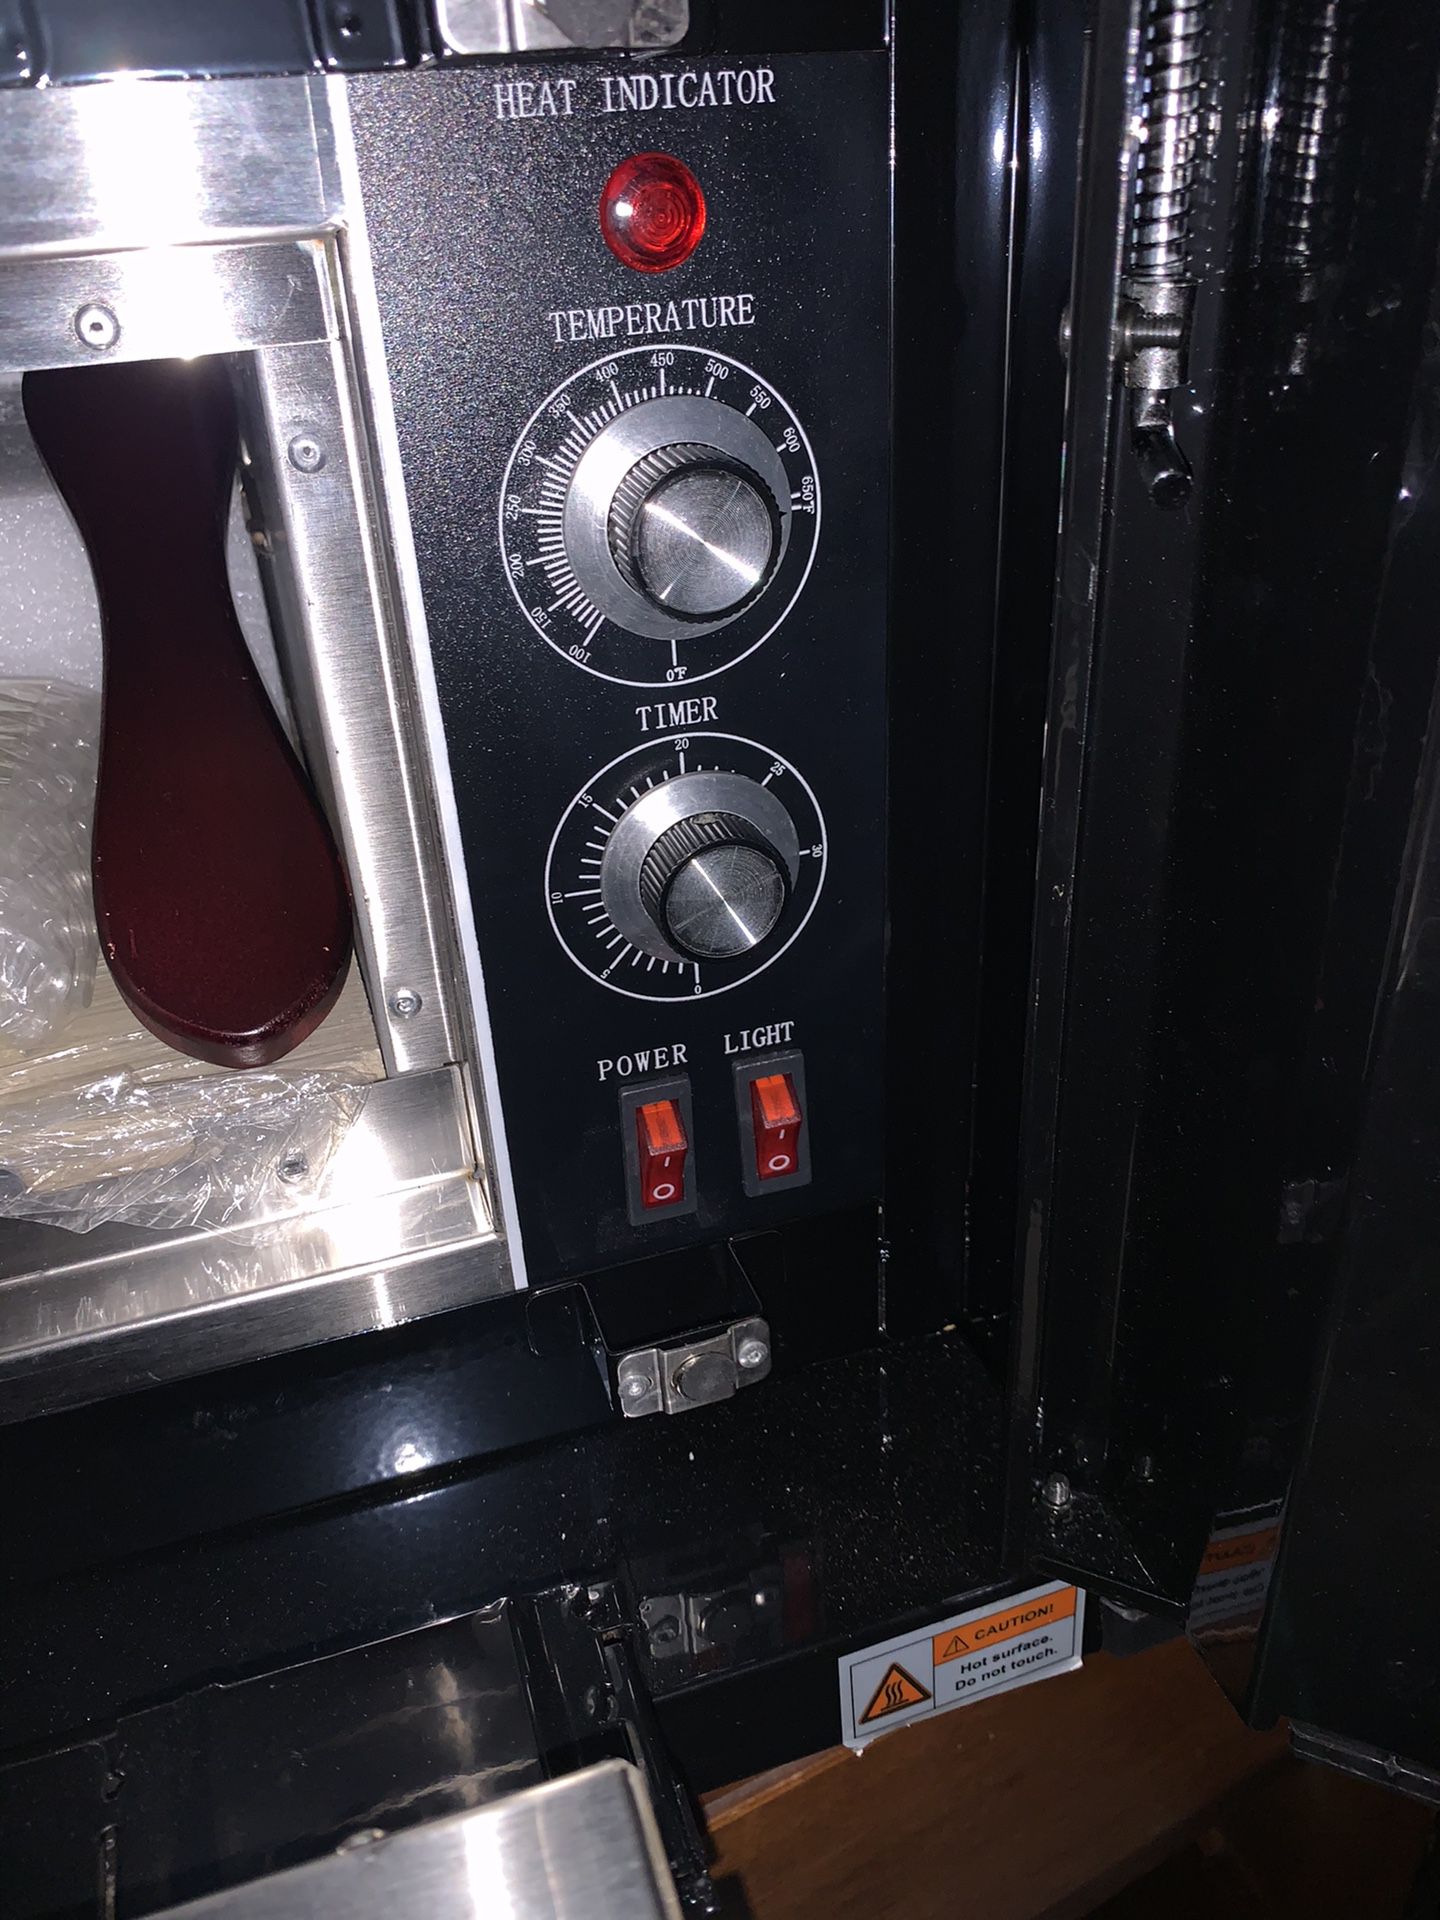 Black + Decker Pizza / Snack Oven P300S for Sale in Henderson, NV - OfferUp